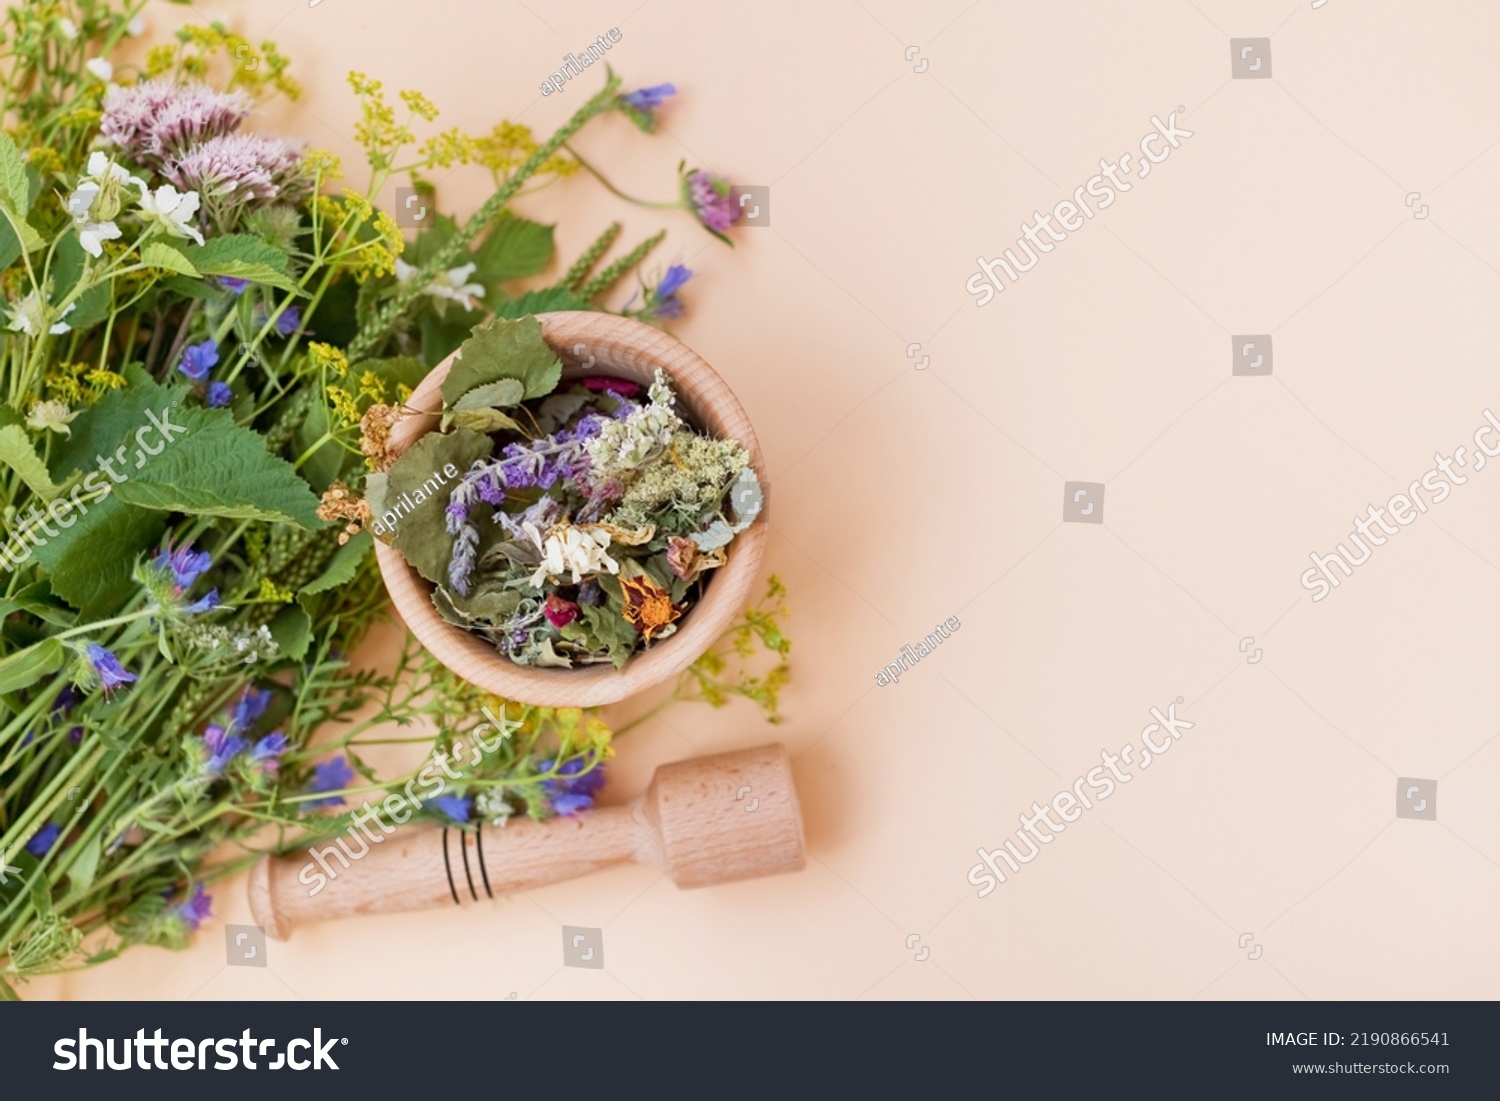 Homeopathy and herbal medicine concept. Bouquet of wildflowers and wooden mortar and pestle with dry herbs on a beige background with copy space #2190866541